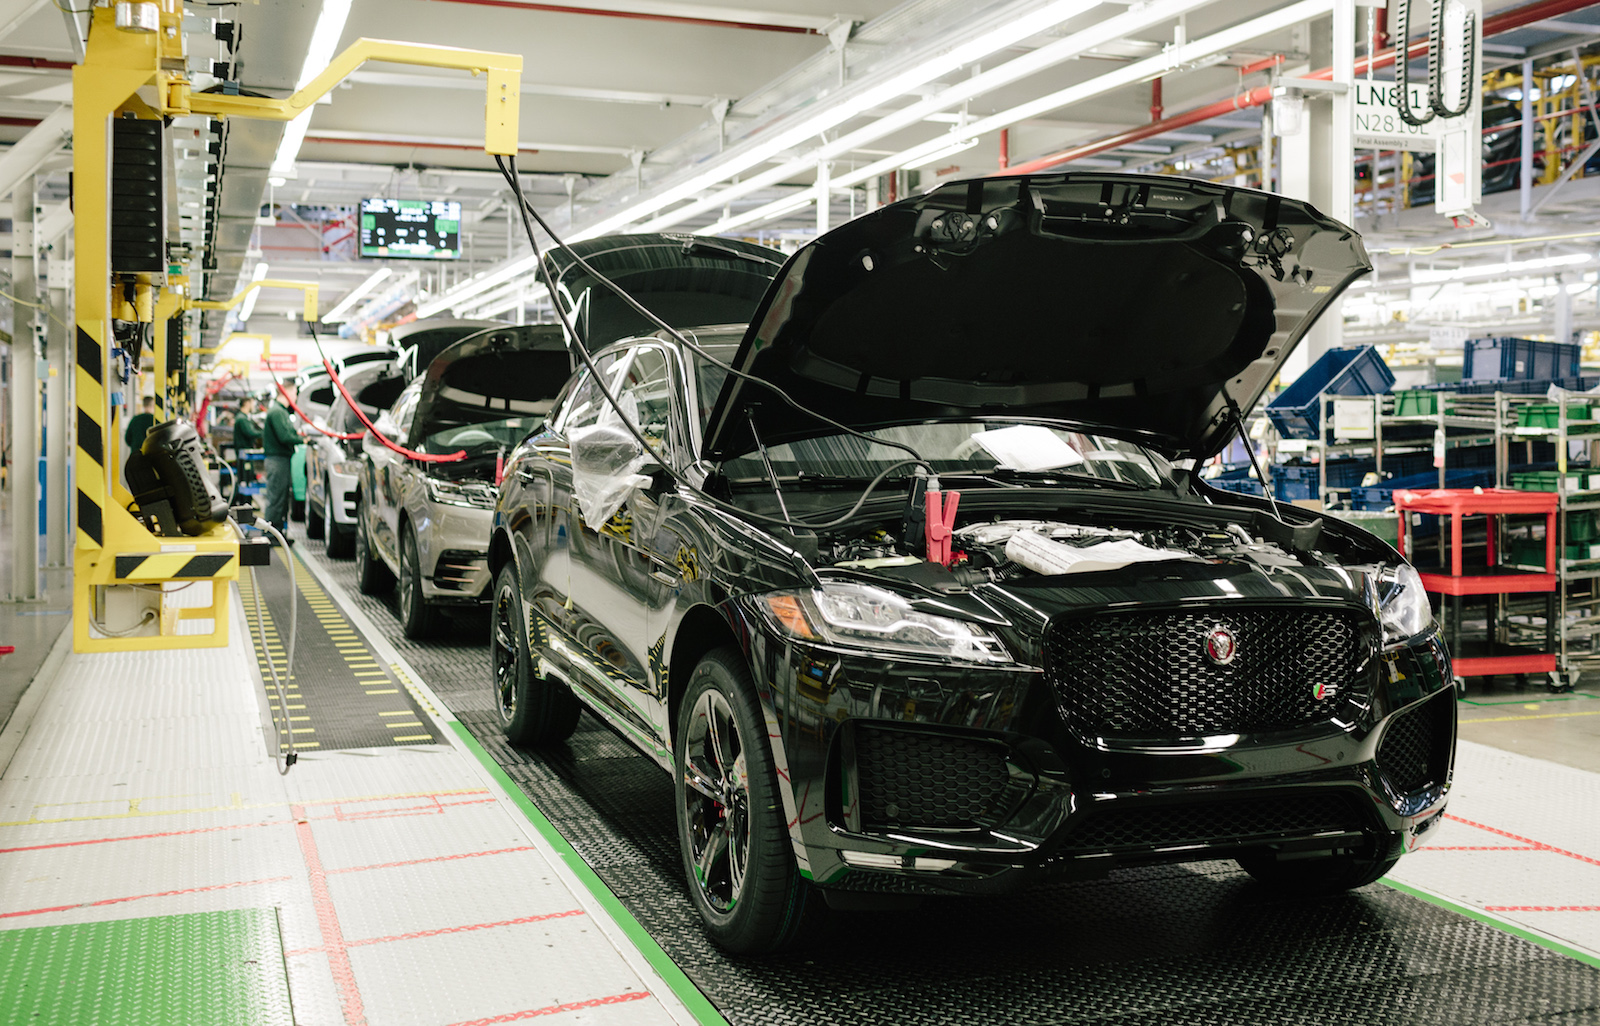 Jaguar F-Pace production hits 100,000, fastest-selling Jag ever